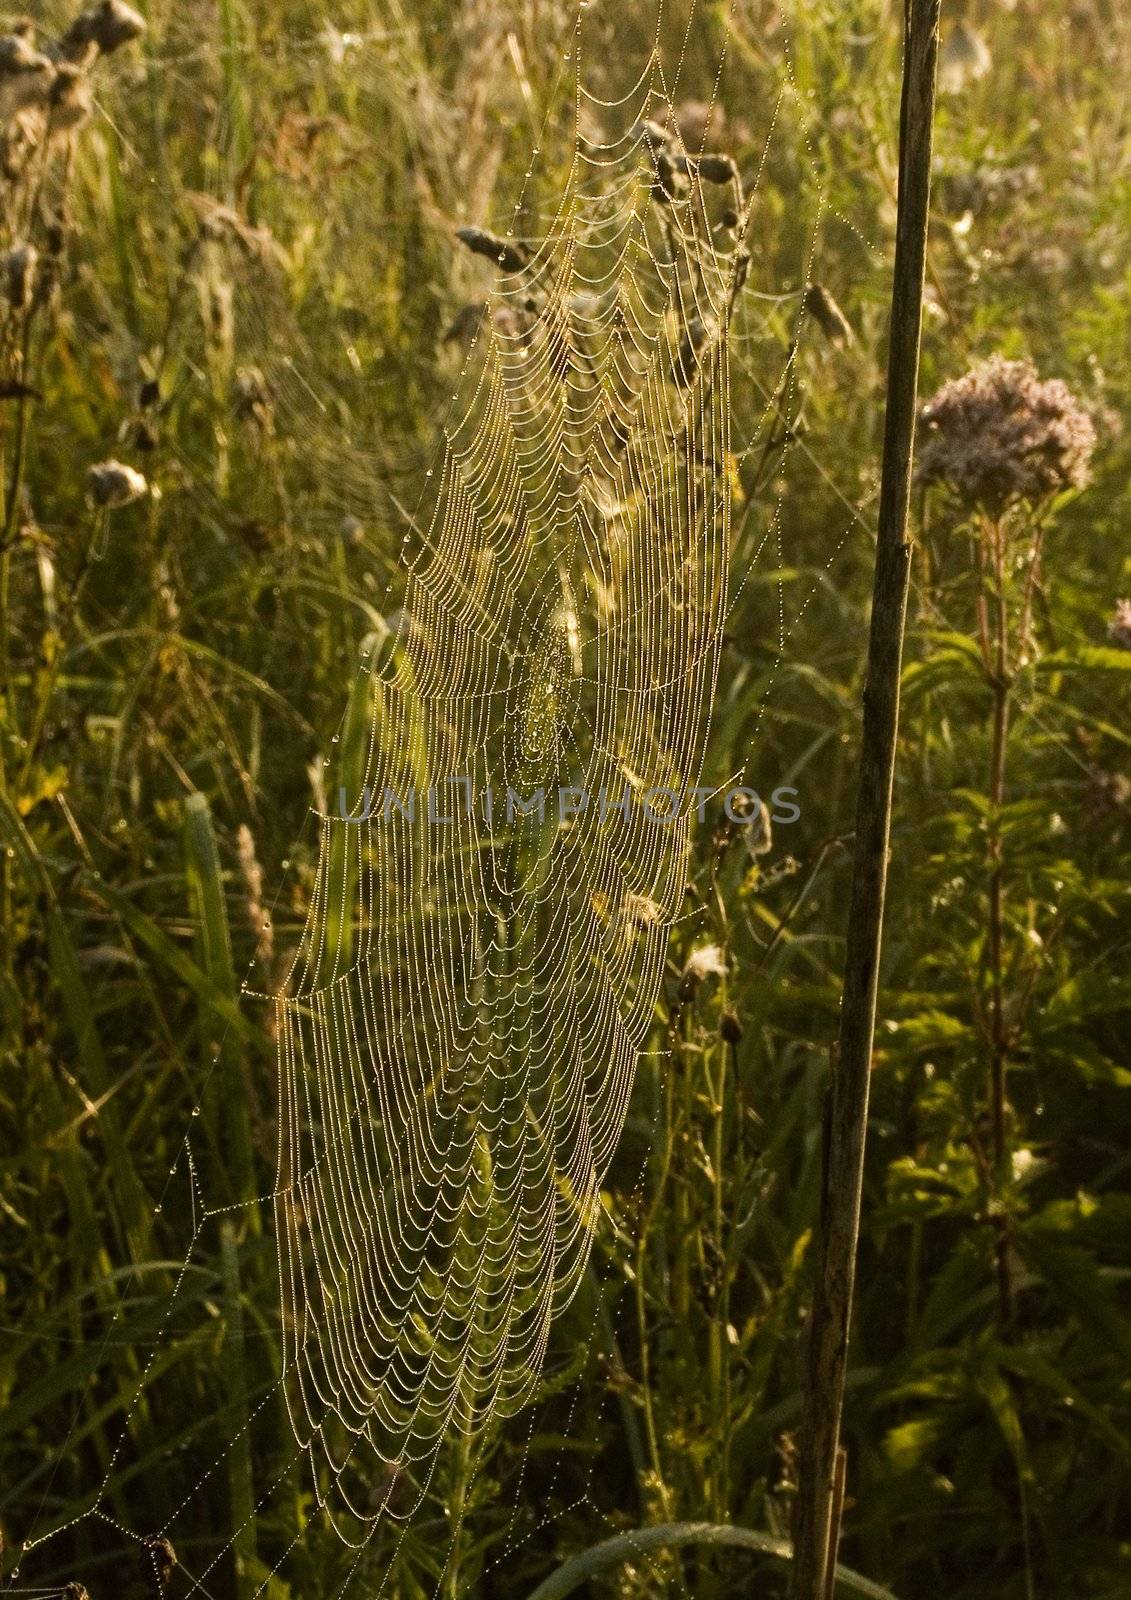 Beautiful spider web in the morning